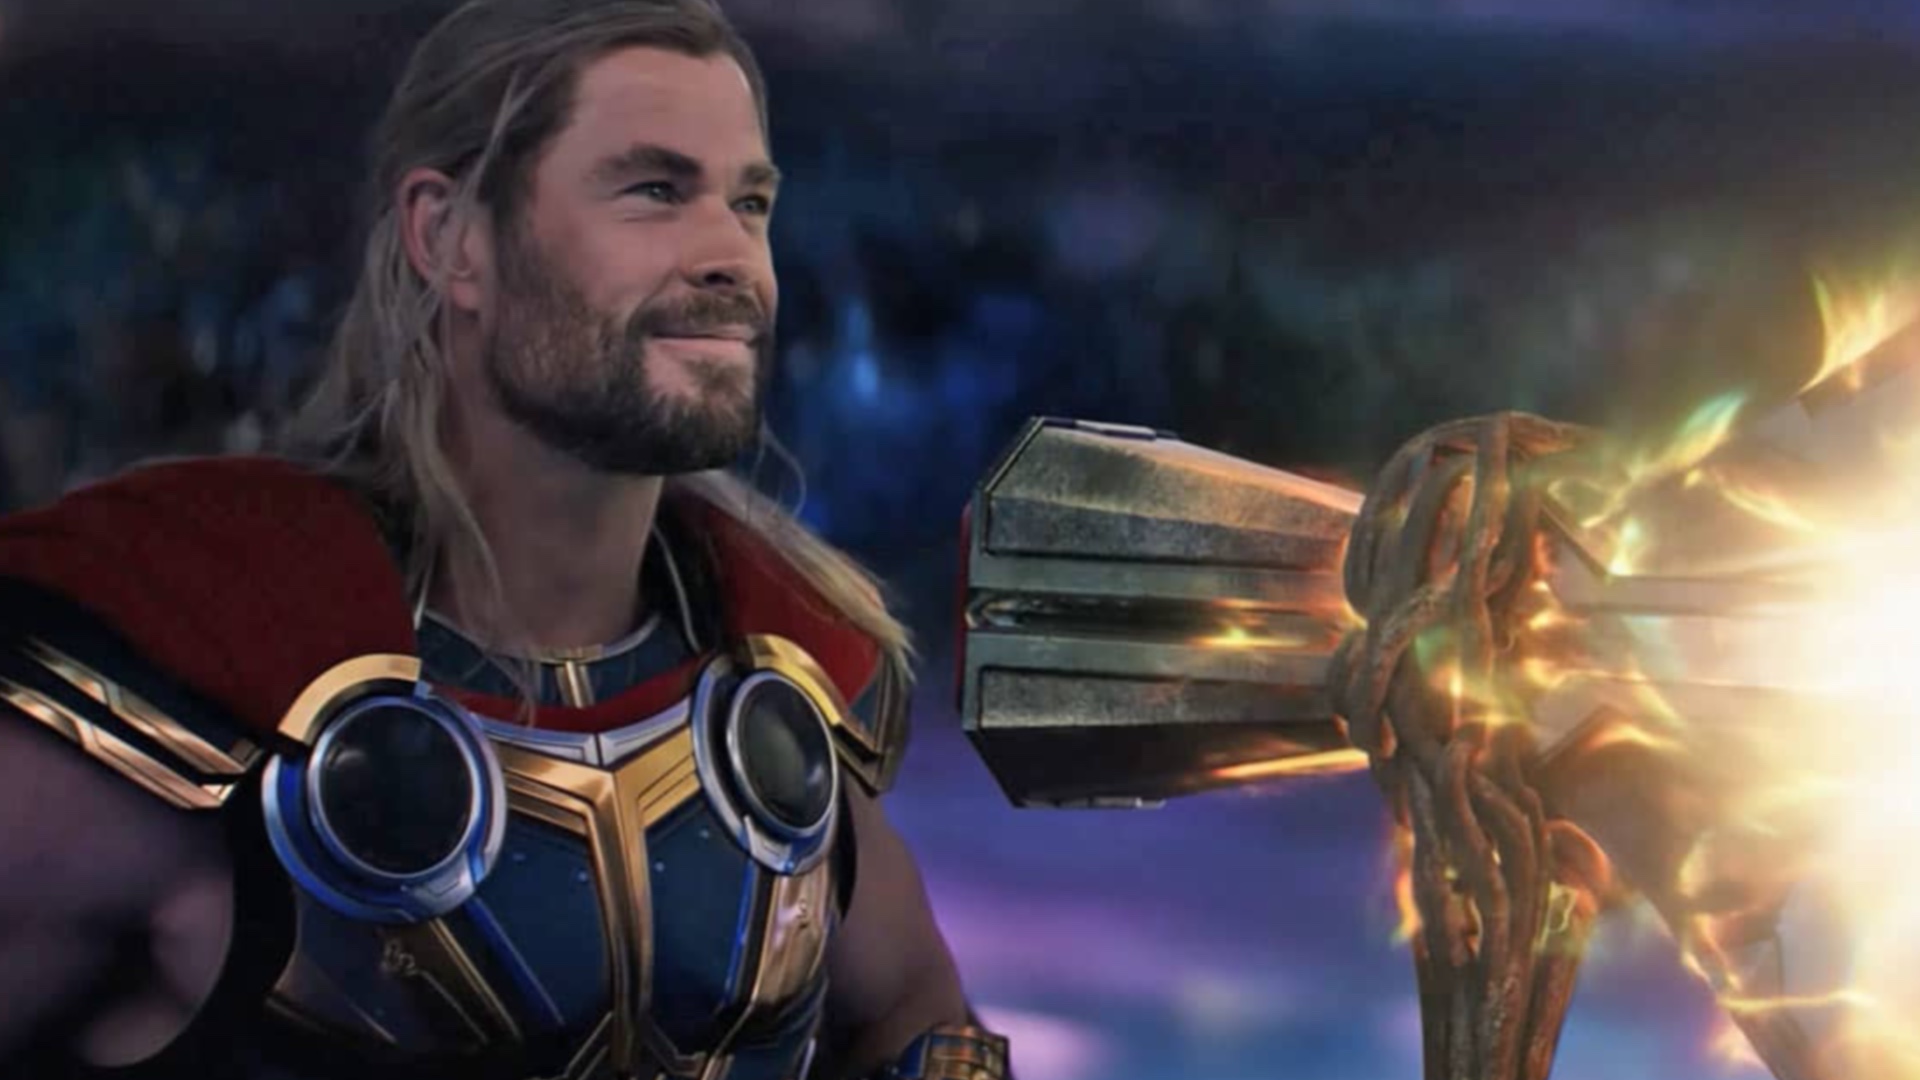 Chris Hemsworth as Thor with Stormbreaker in Thor: Love and Thunder (2022).